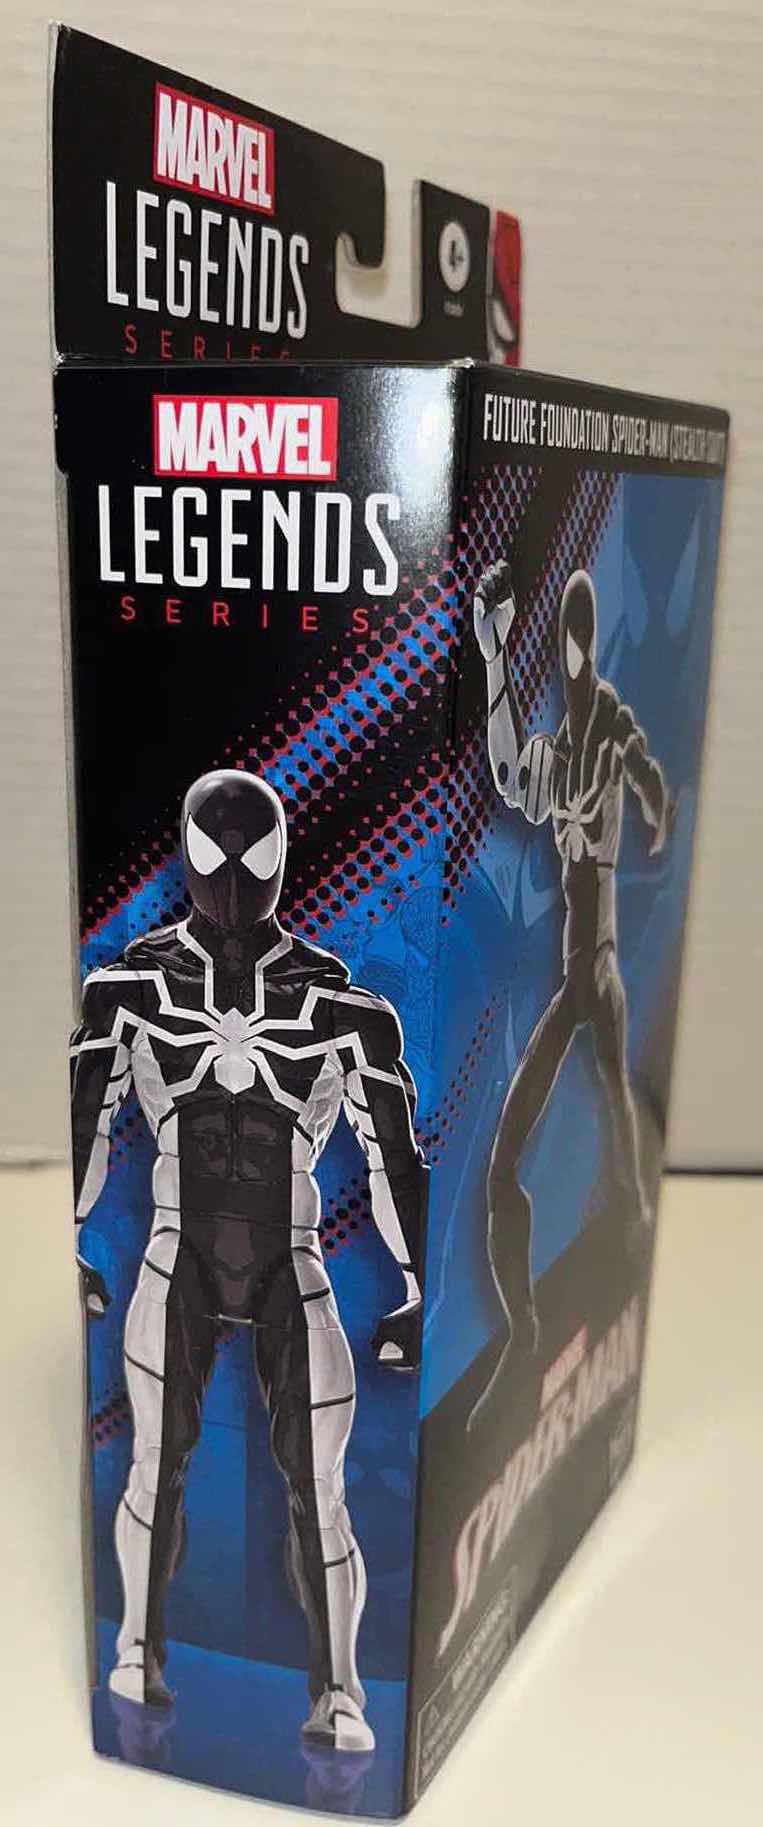 Photo 2 of NEW HASBRO MARVEL LEGEND SERIES ACTION FIGURE & ACCESSORIES, SPIDER-MAN  “FUTURE FOUNDATION SPIDER-MAN (STEALTH SUIT)” $30.00 (1)